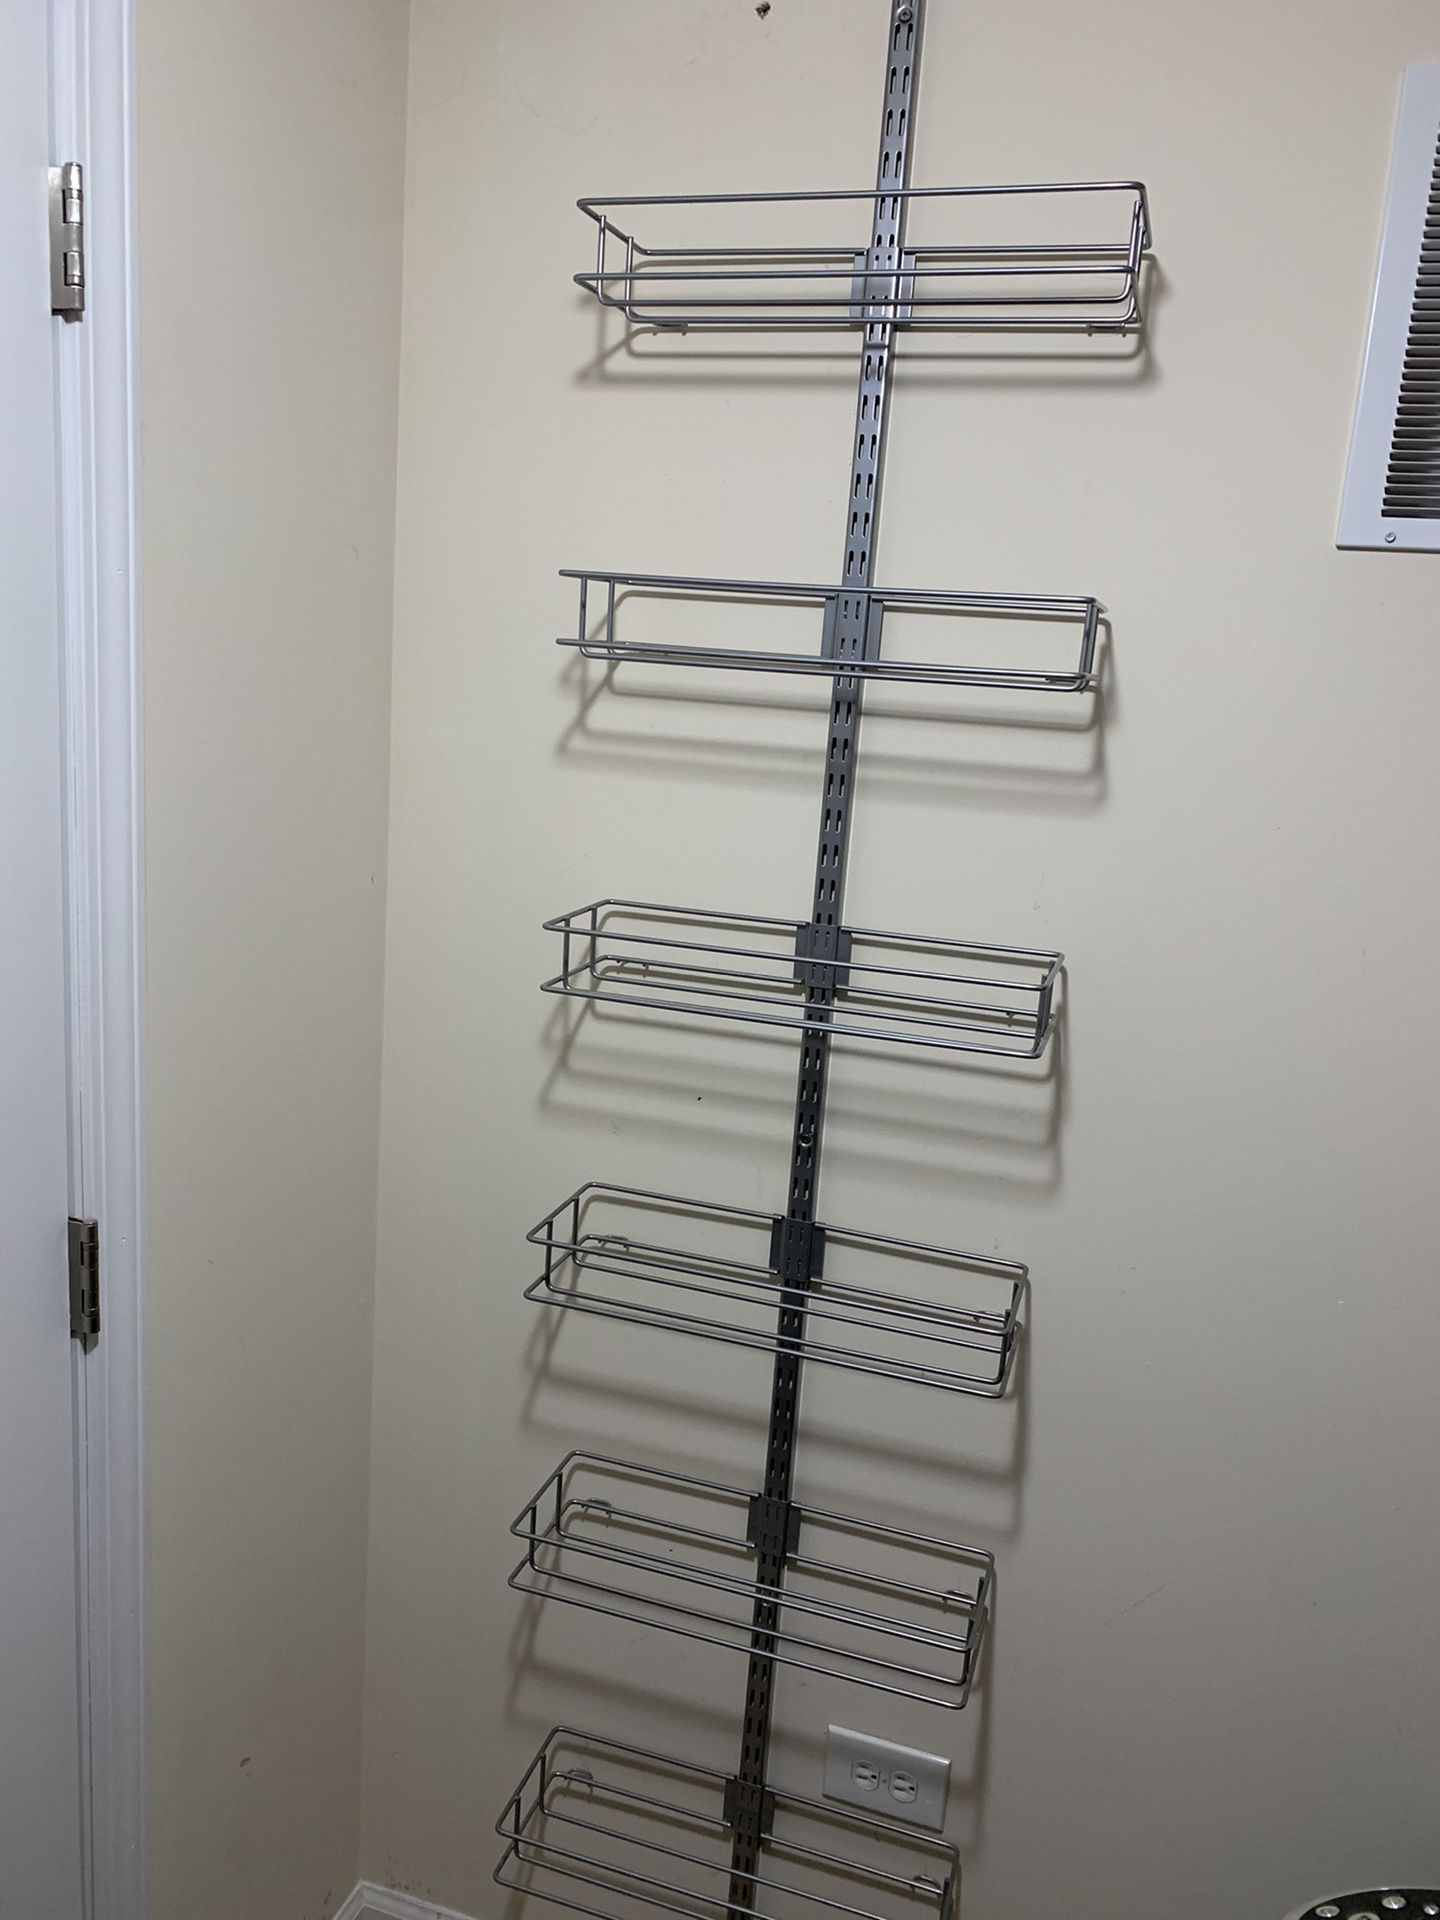 The Container Store media/storage/pantry/garage rack